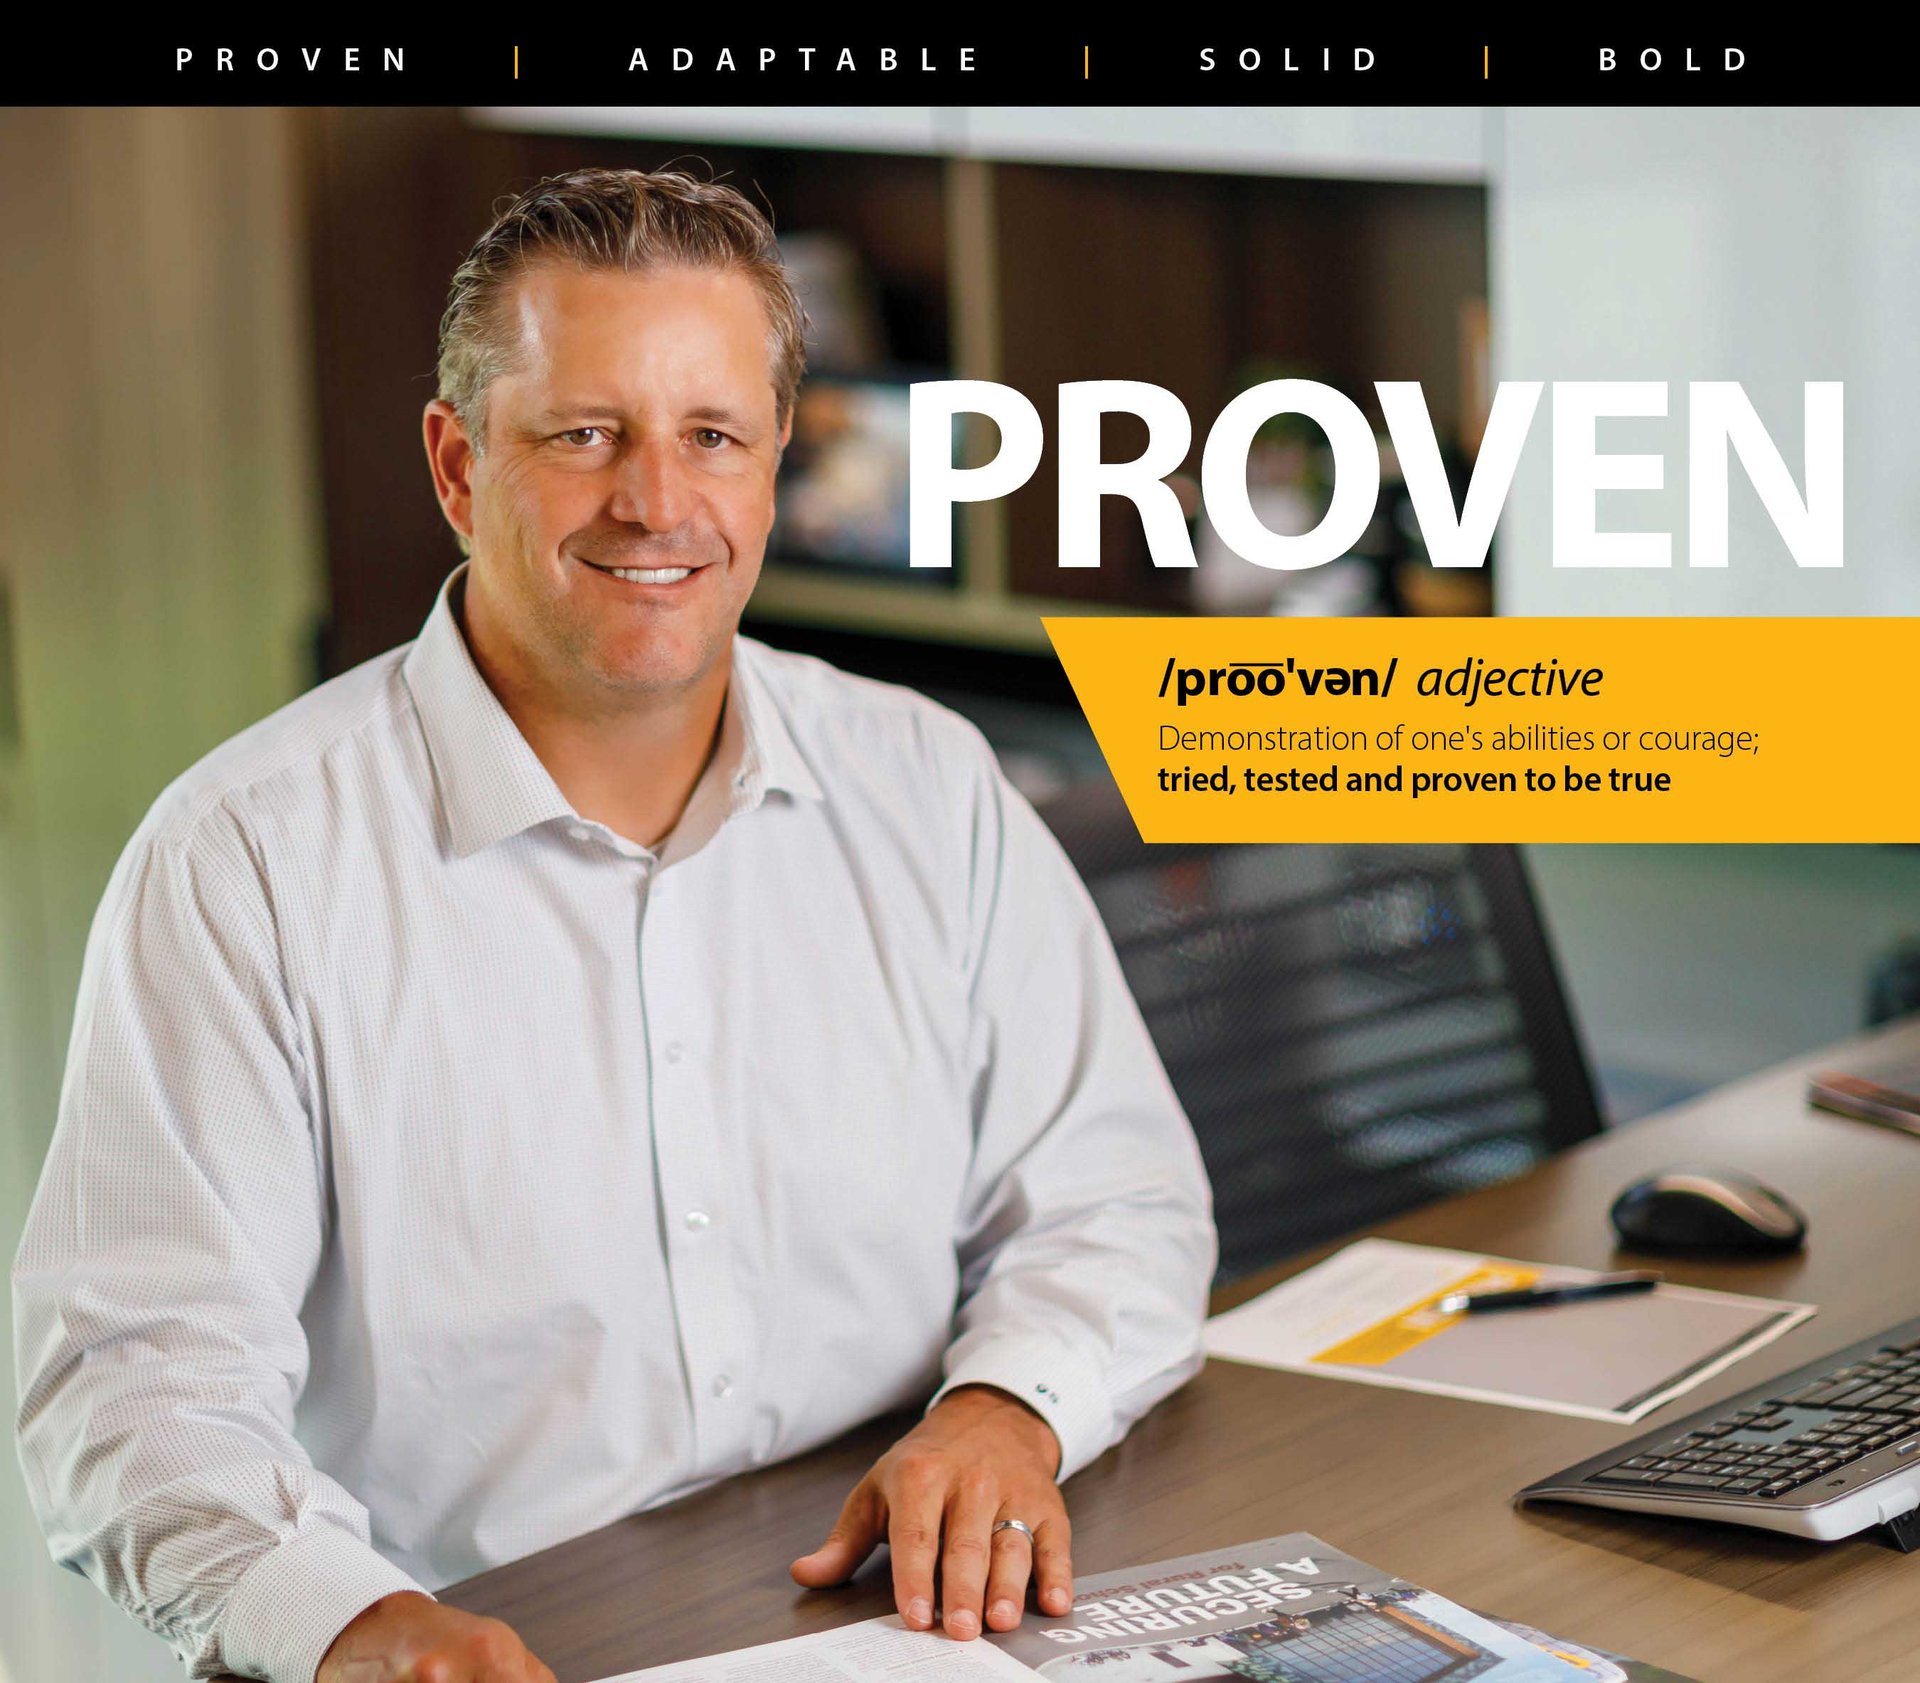 CD Smith Construction Senior Vice President Greg Sabel at his desk with PROVEN overlay and definition